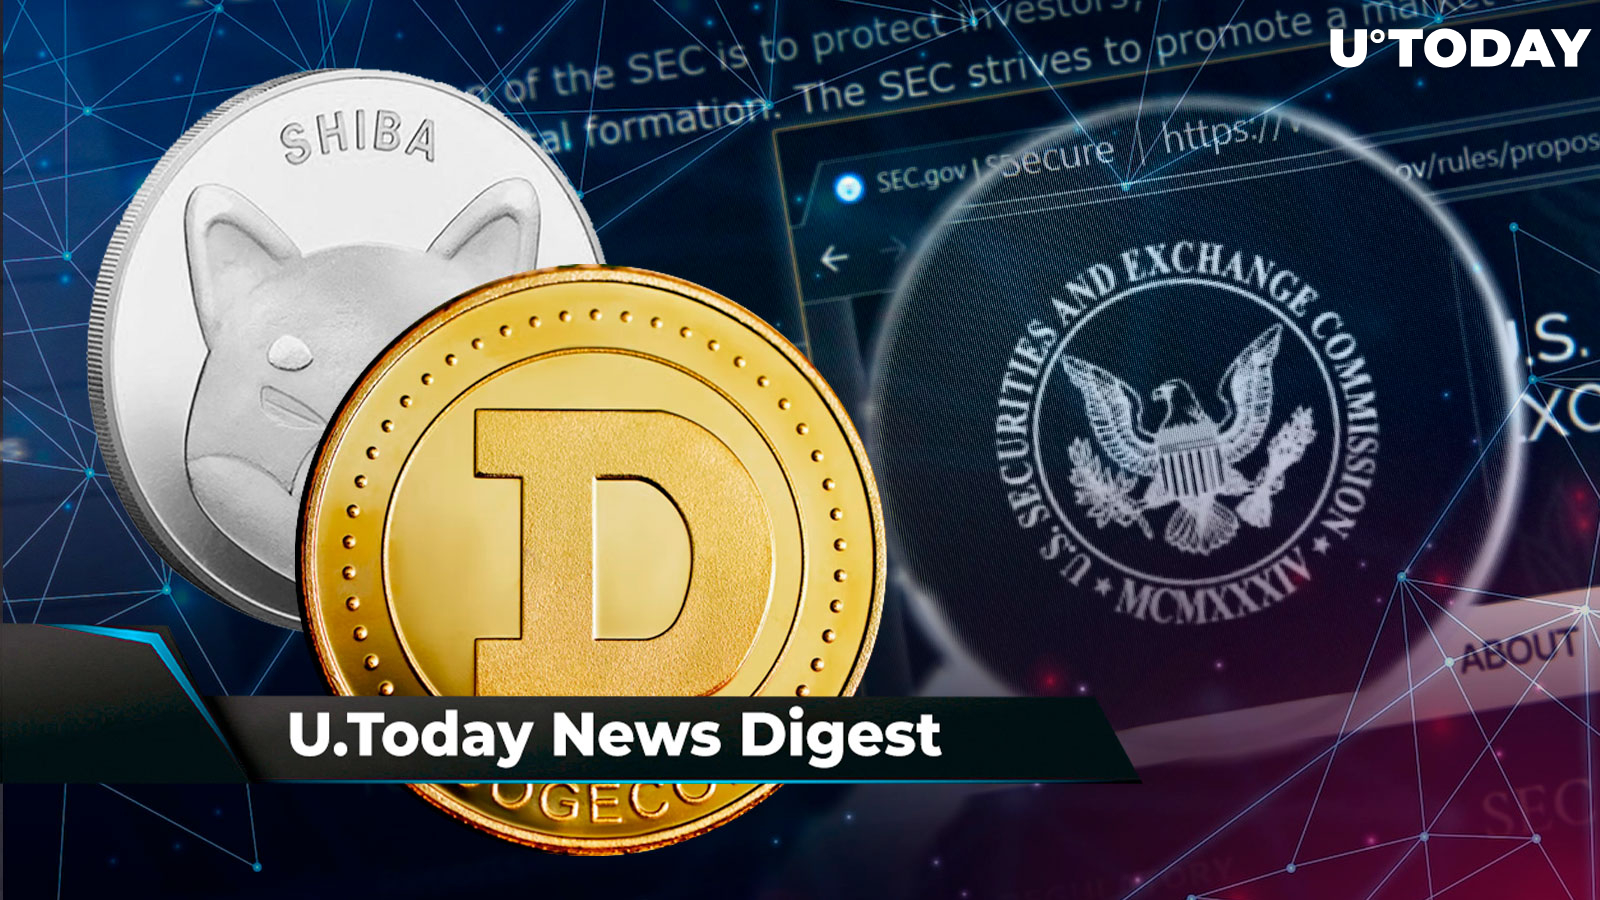 Jeremie Davinci Sells Everything but DOGE and SHIB, SEC Investigates BNB, SHIB Listed by Bitstamp: Crypto News Digest by U.Today